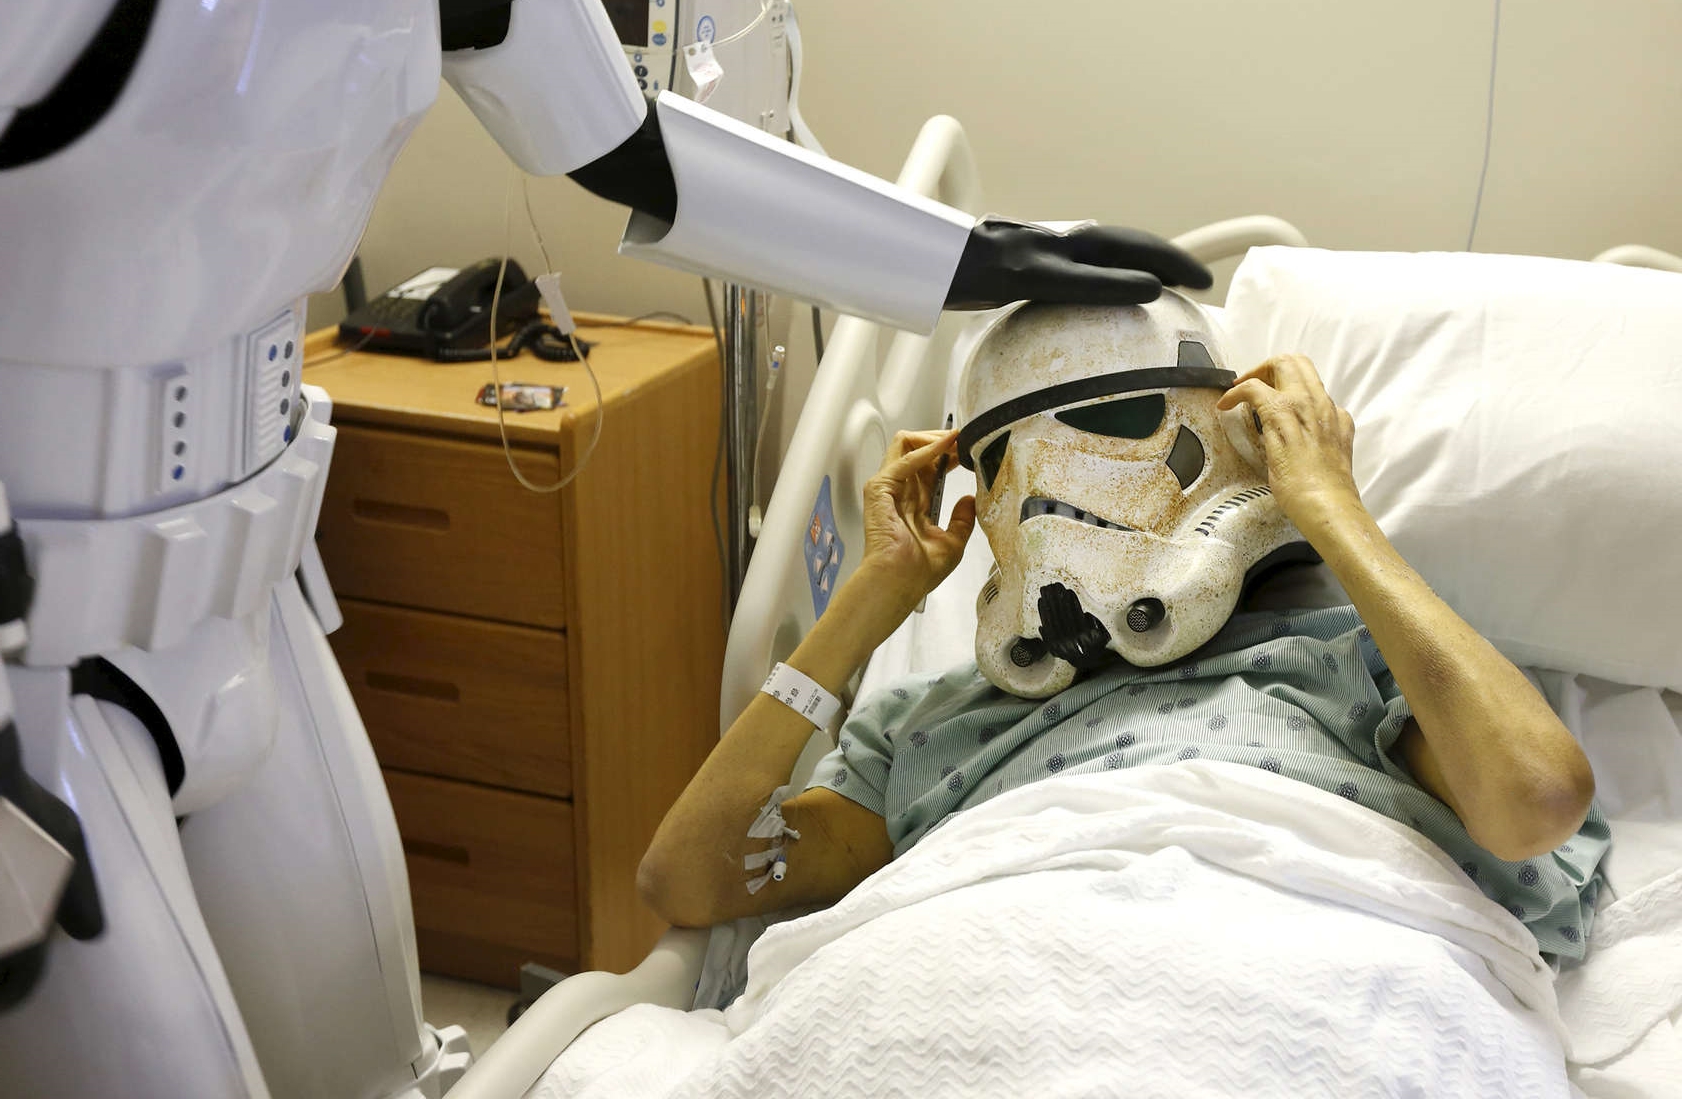 The Empire Strikes Back: House repeals the Affordable Care Act in May 4 vote